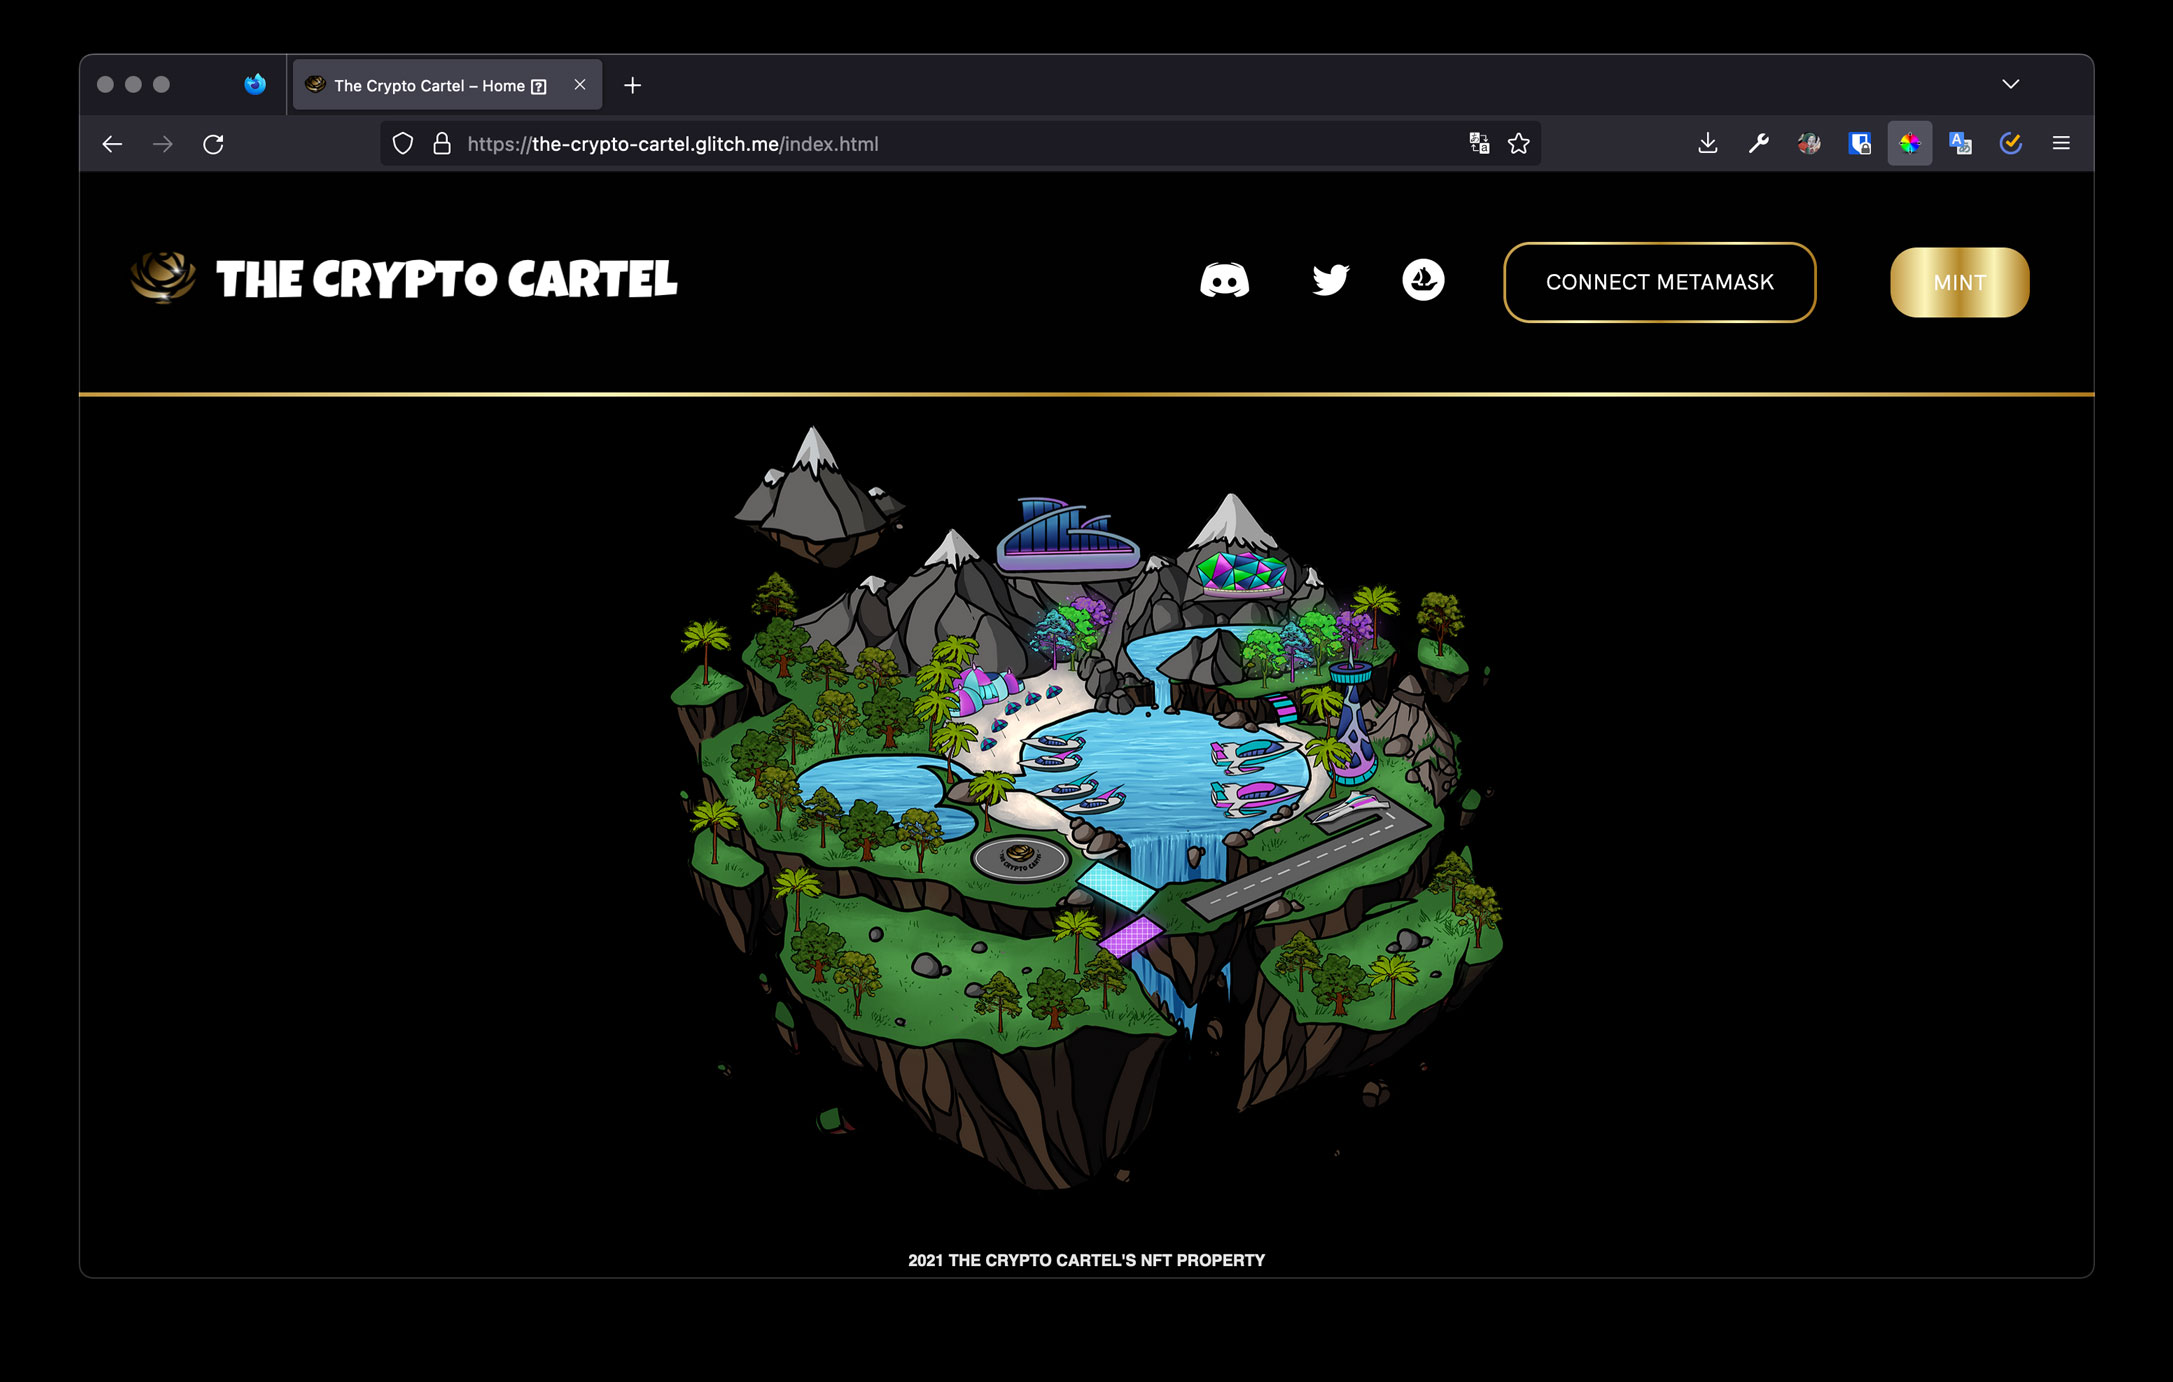 Landing page of the Crypto Cartel website.